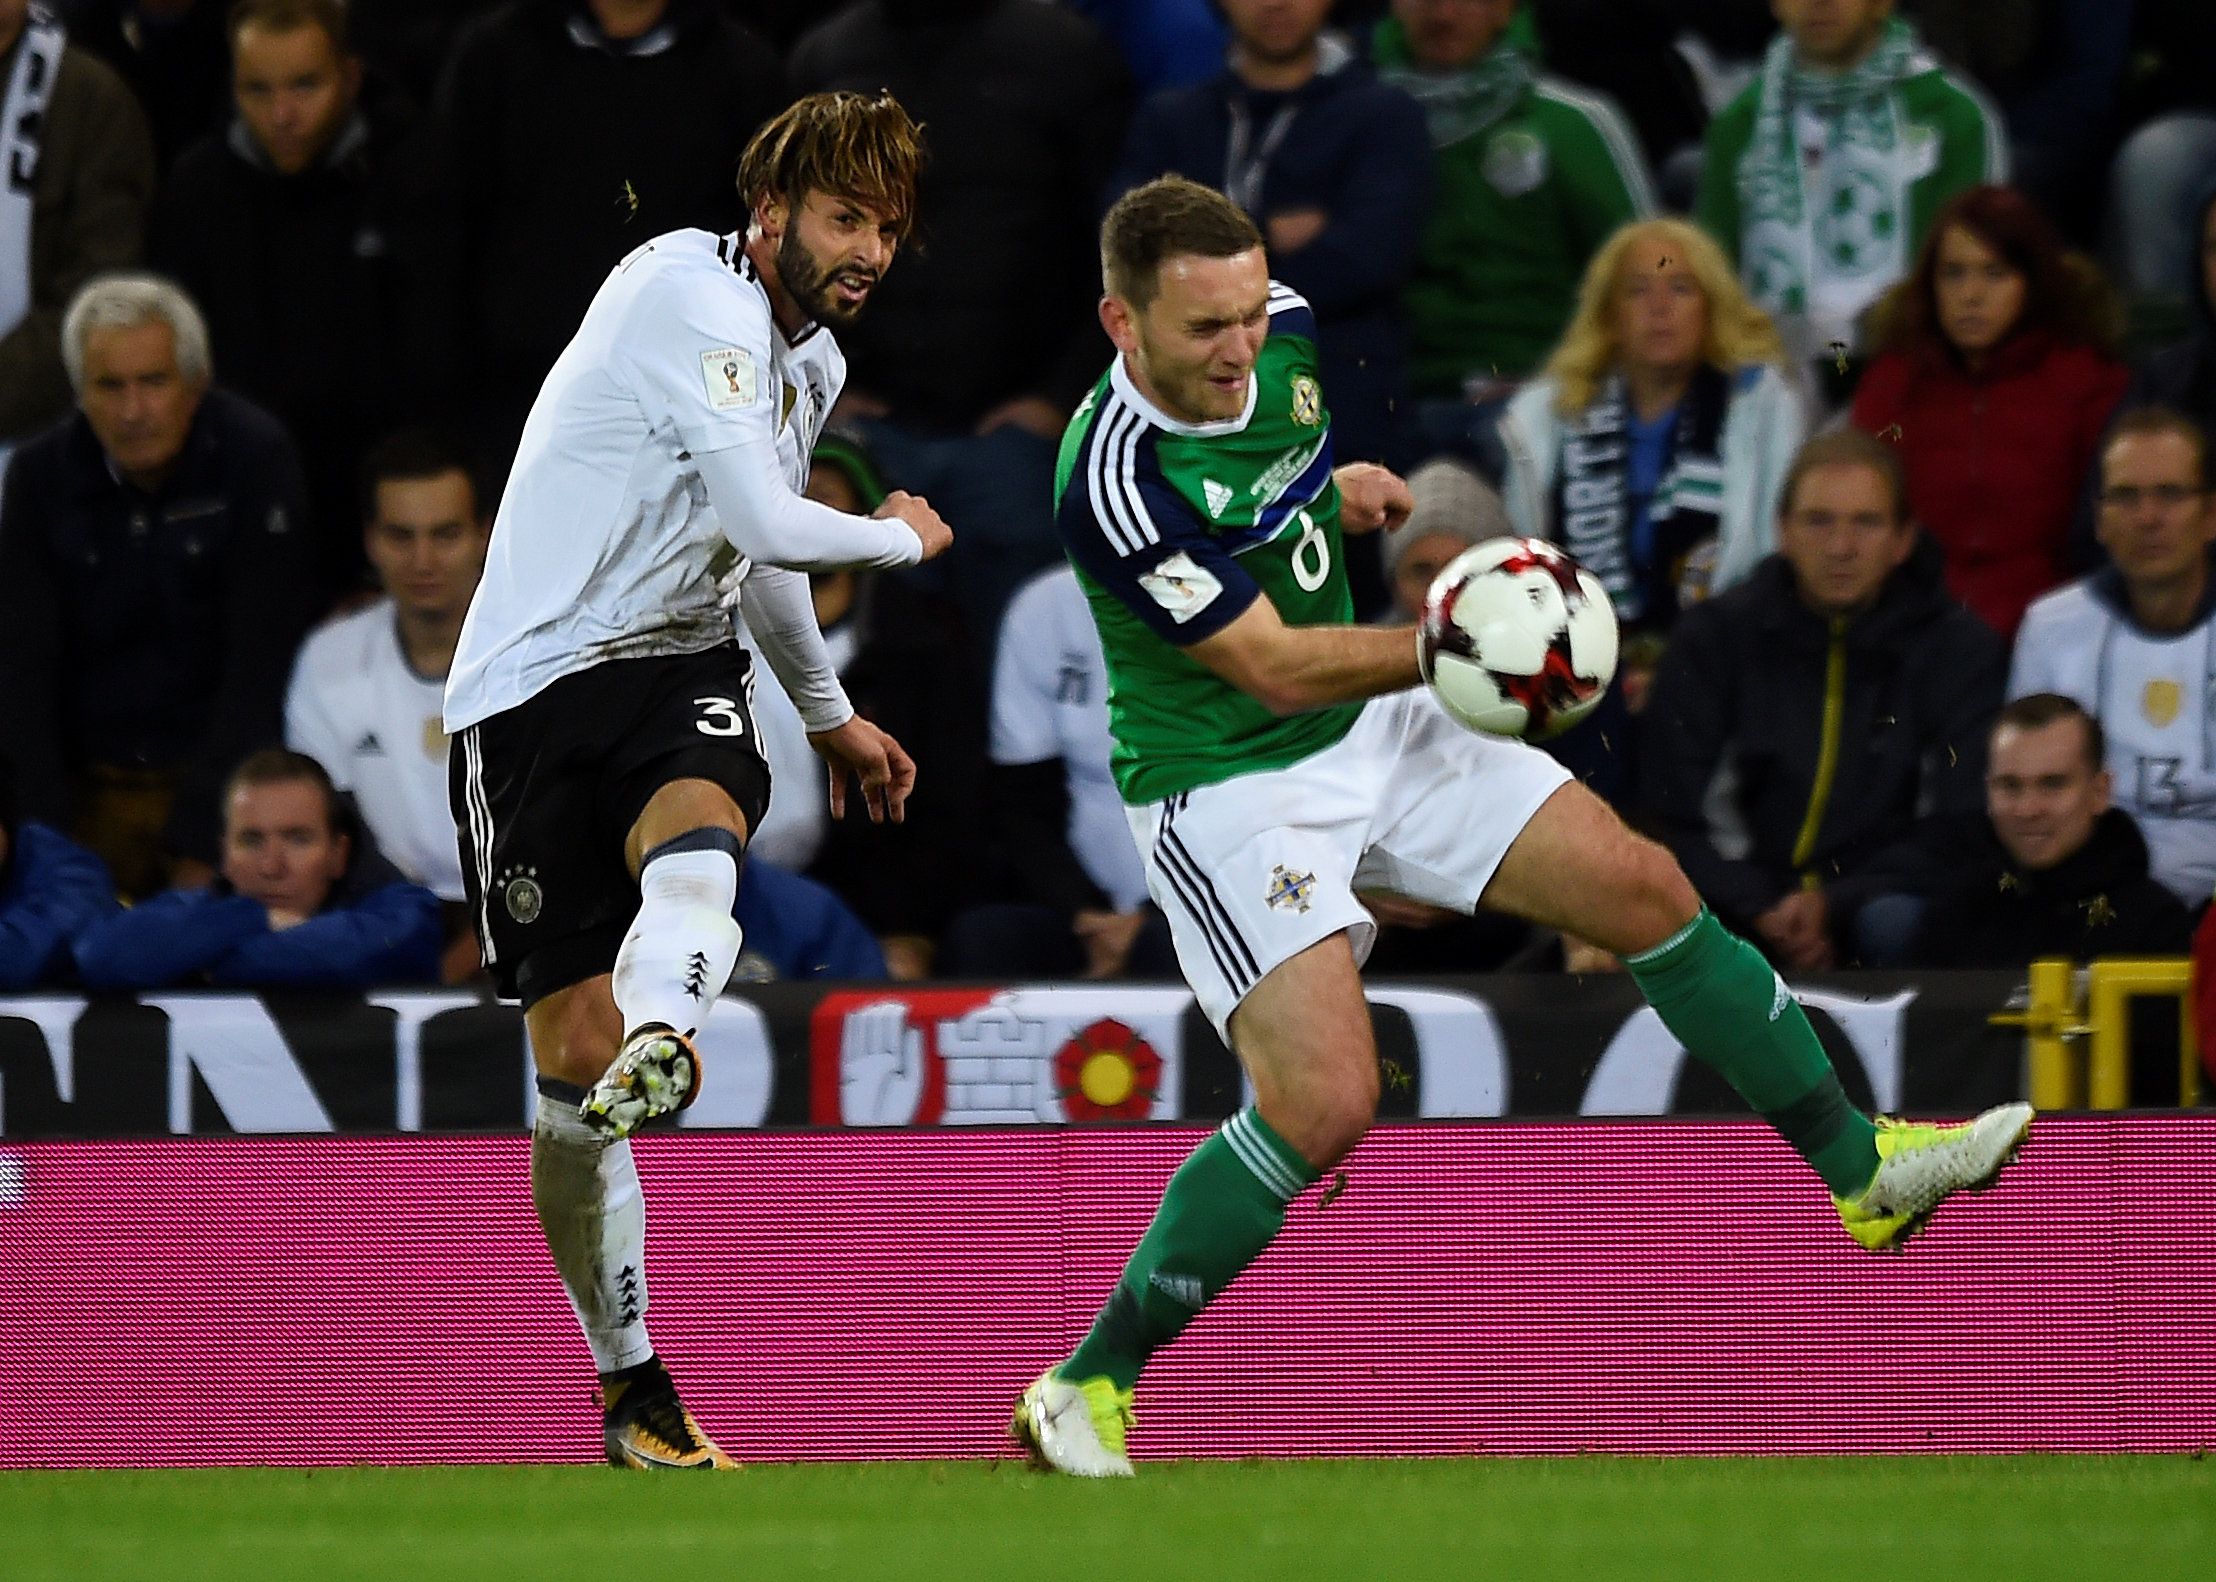 Soccer Football - 2018 World Cup Qualifications - Europe - Northern Ireland vs Germany - Windsor Park, Belfast, Britain - October 5, 2017   Germany’s Marvin Plattenhardt in action with Northern Ireland’s Lee Hodson    REUTERS/Clodagh Kilcoyne